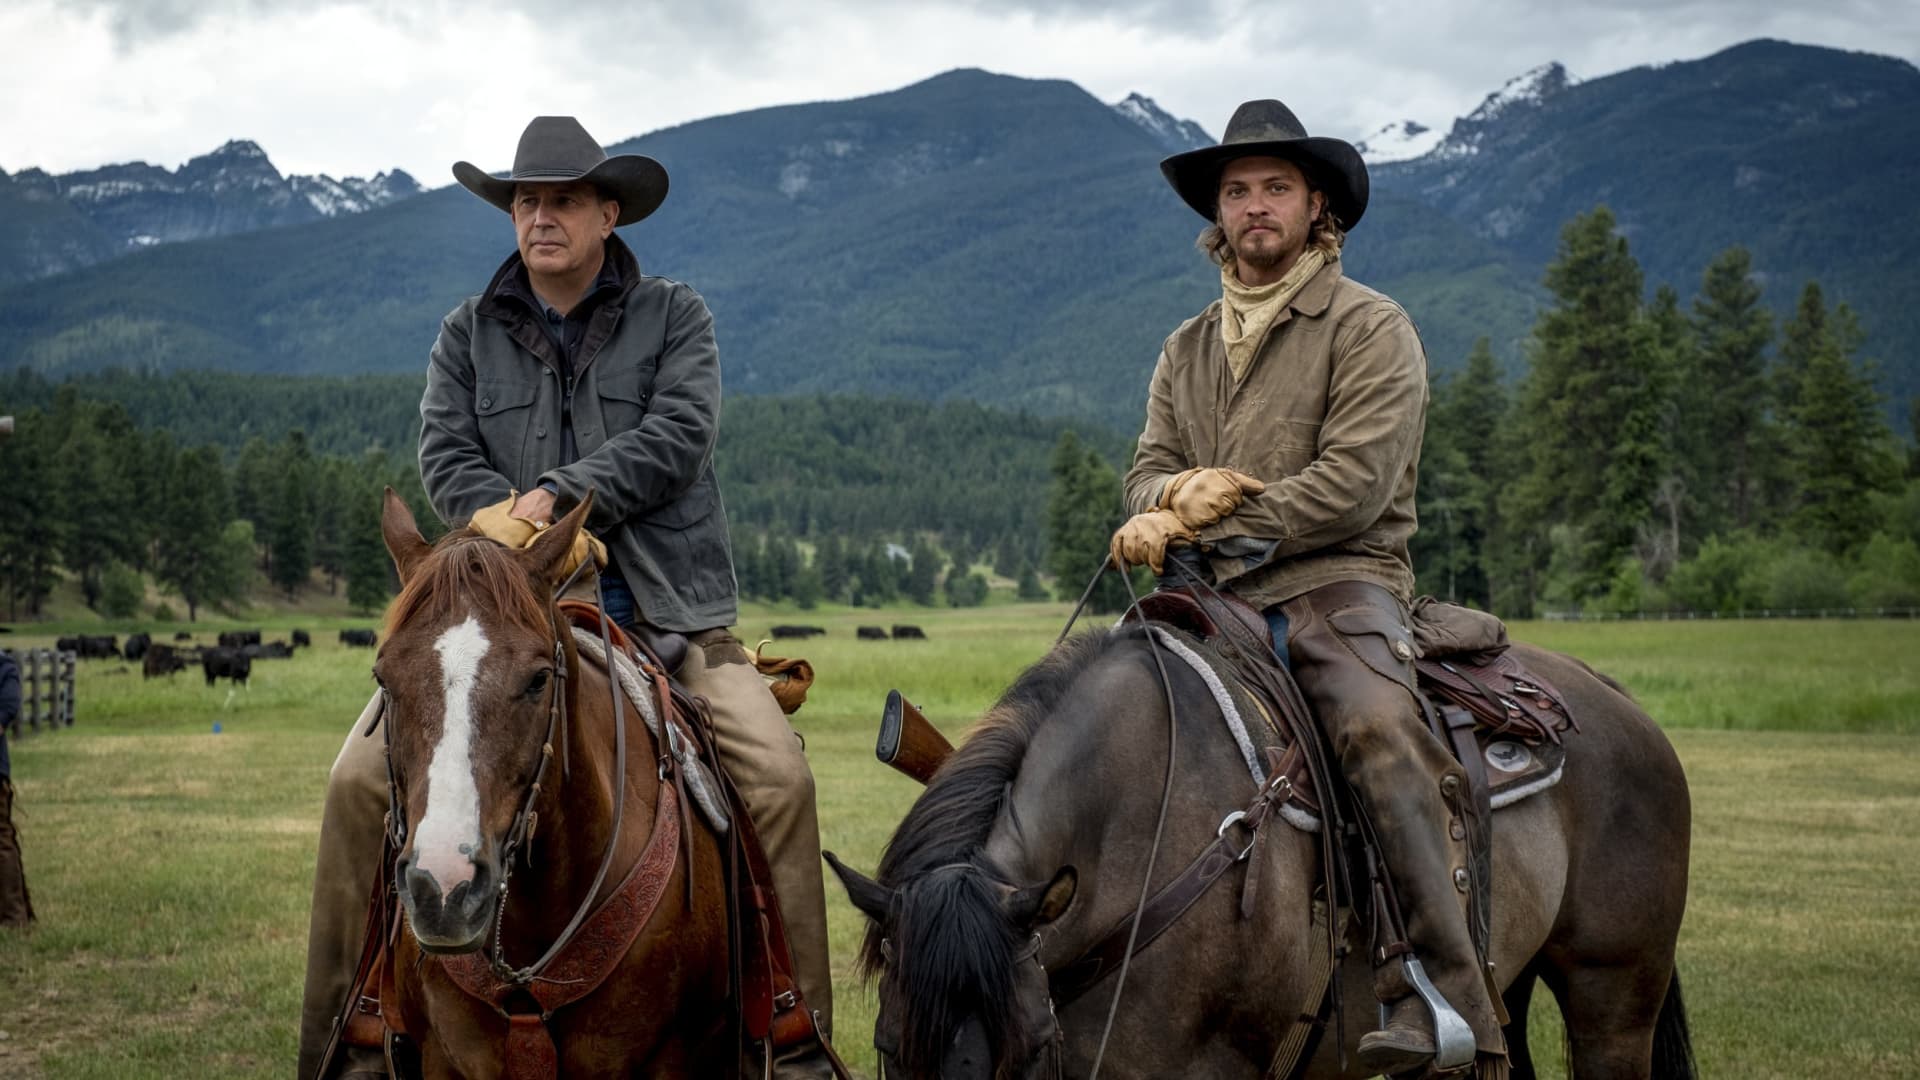 ‘Yellowstone’ boom pits lifetime Montana residents against wealthy newcomers